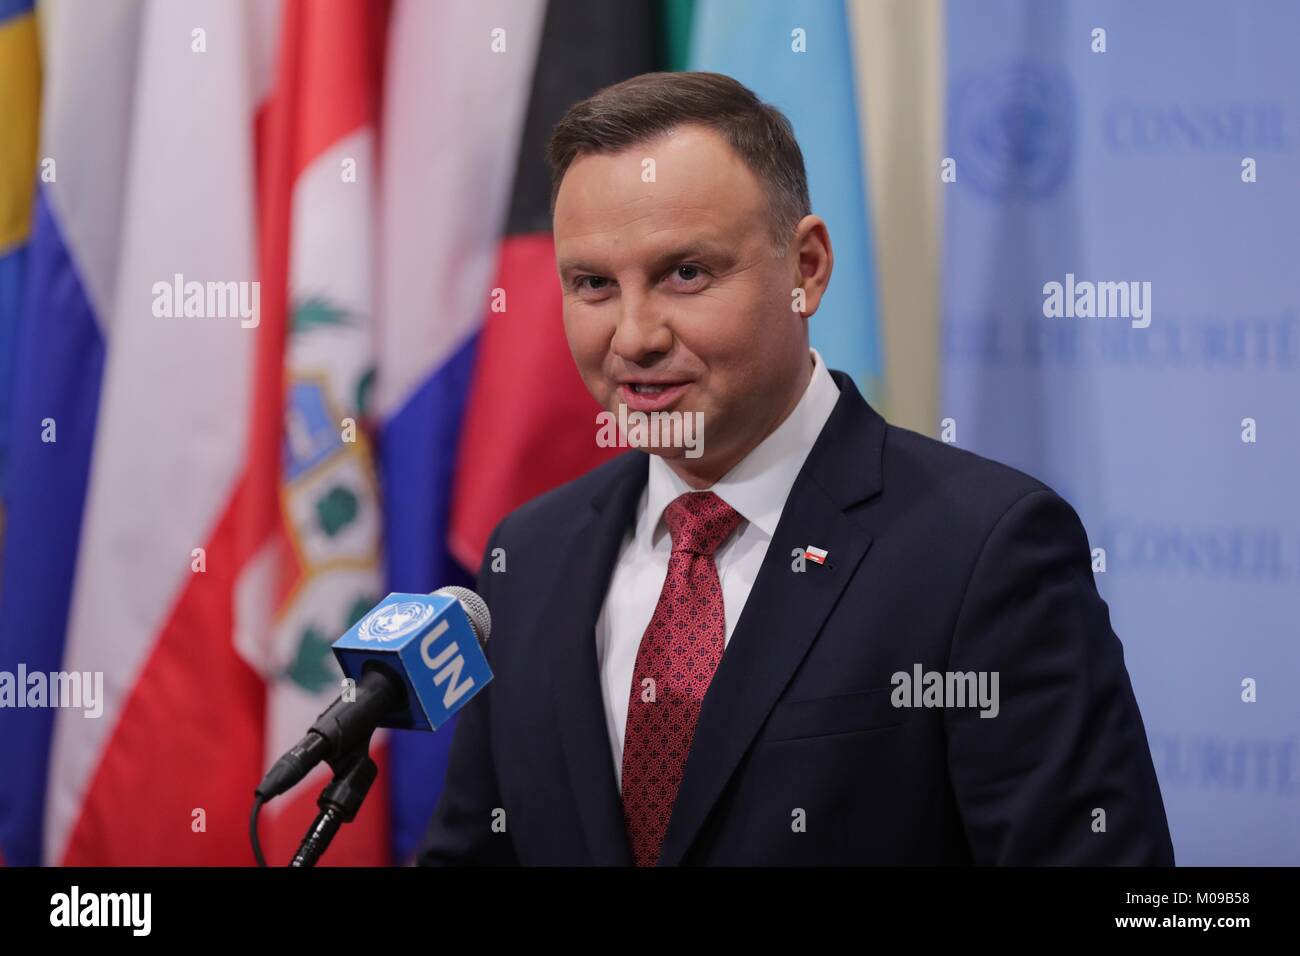 United Nations, New York, USA, January 18 2018 - Andrzej Duda, President of the Republic of Poland presser after the Security Council meeting on Non-proliferation of Weapons of Mass Destruction today at the UN Headquarters in New York City. Photo: Luiz Rampelotto/EuropaNewswire *** Local Caption *** 00005859 | usage worldwide Stock Photo